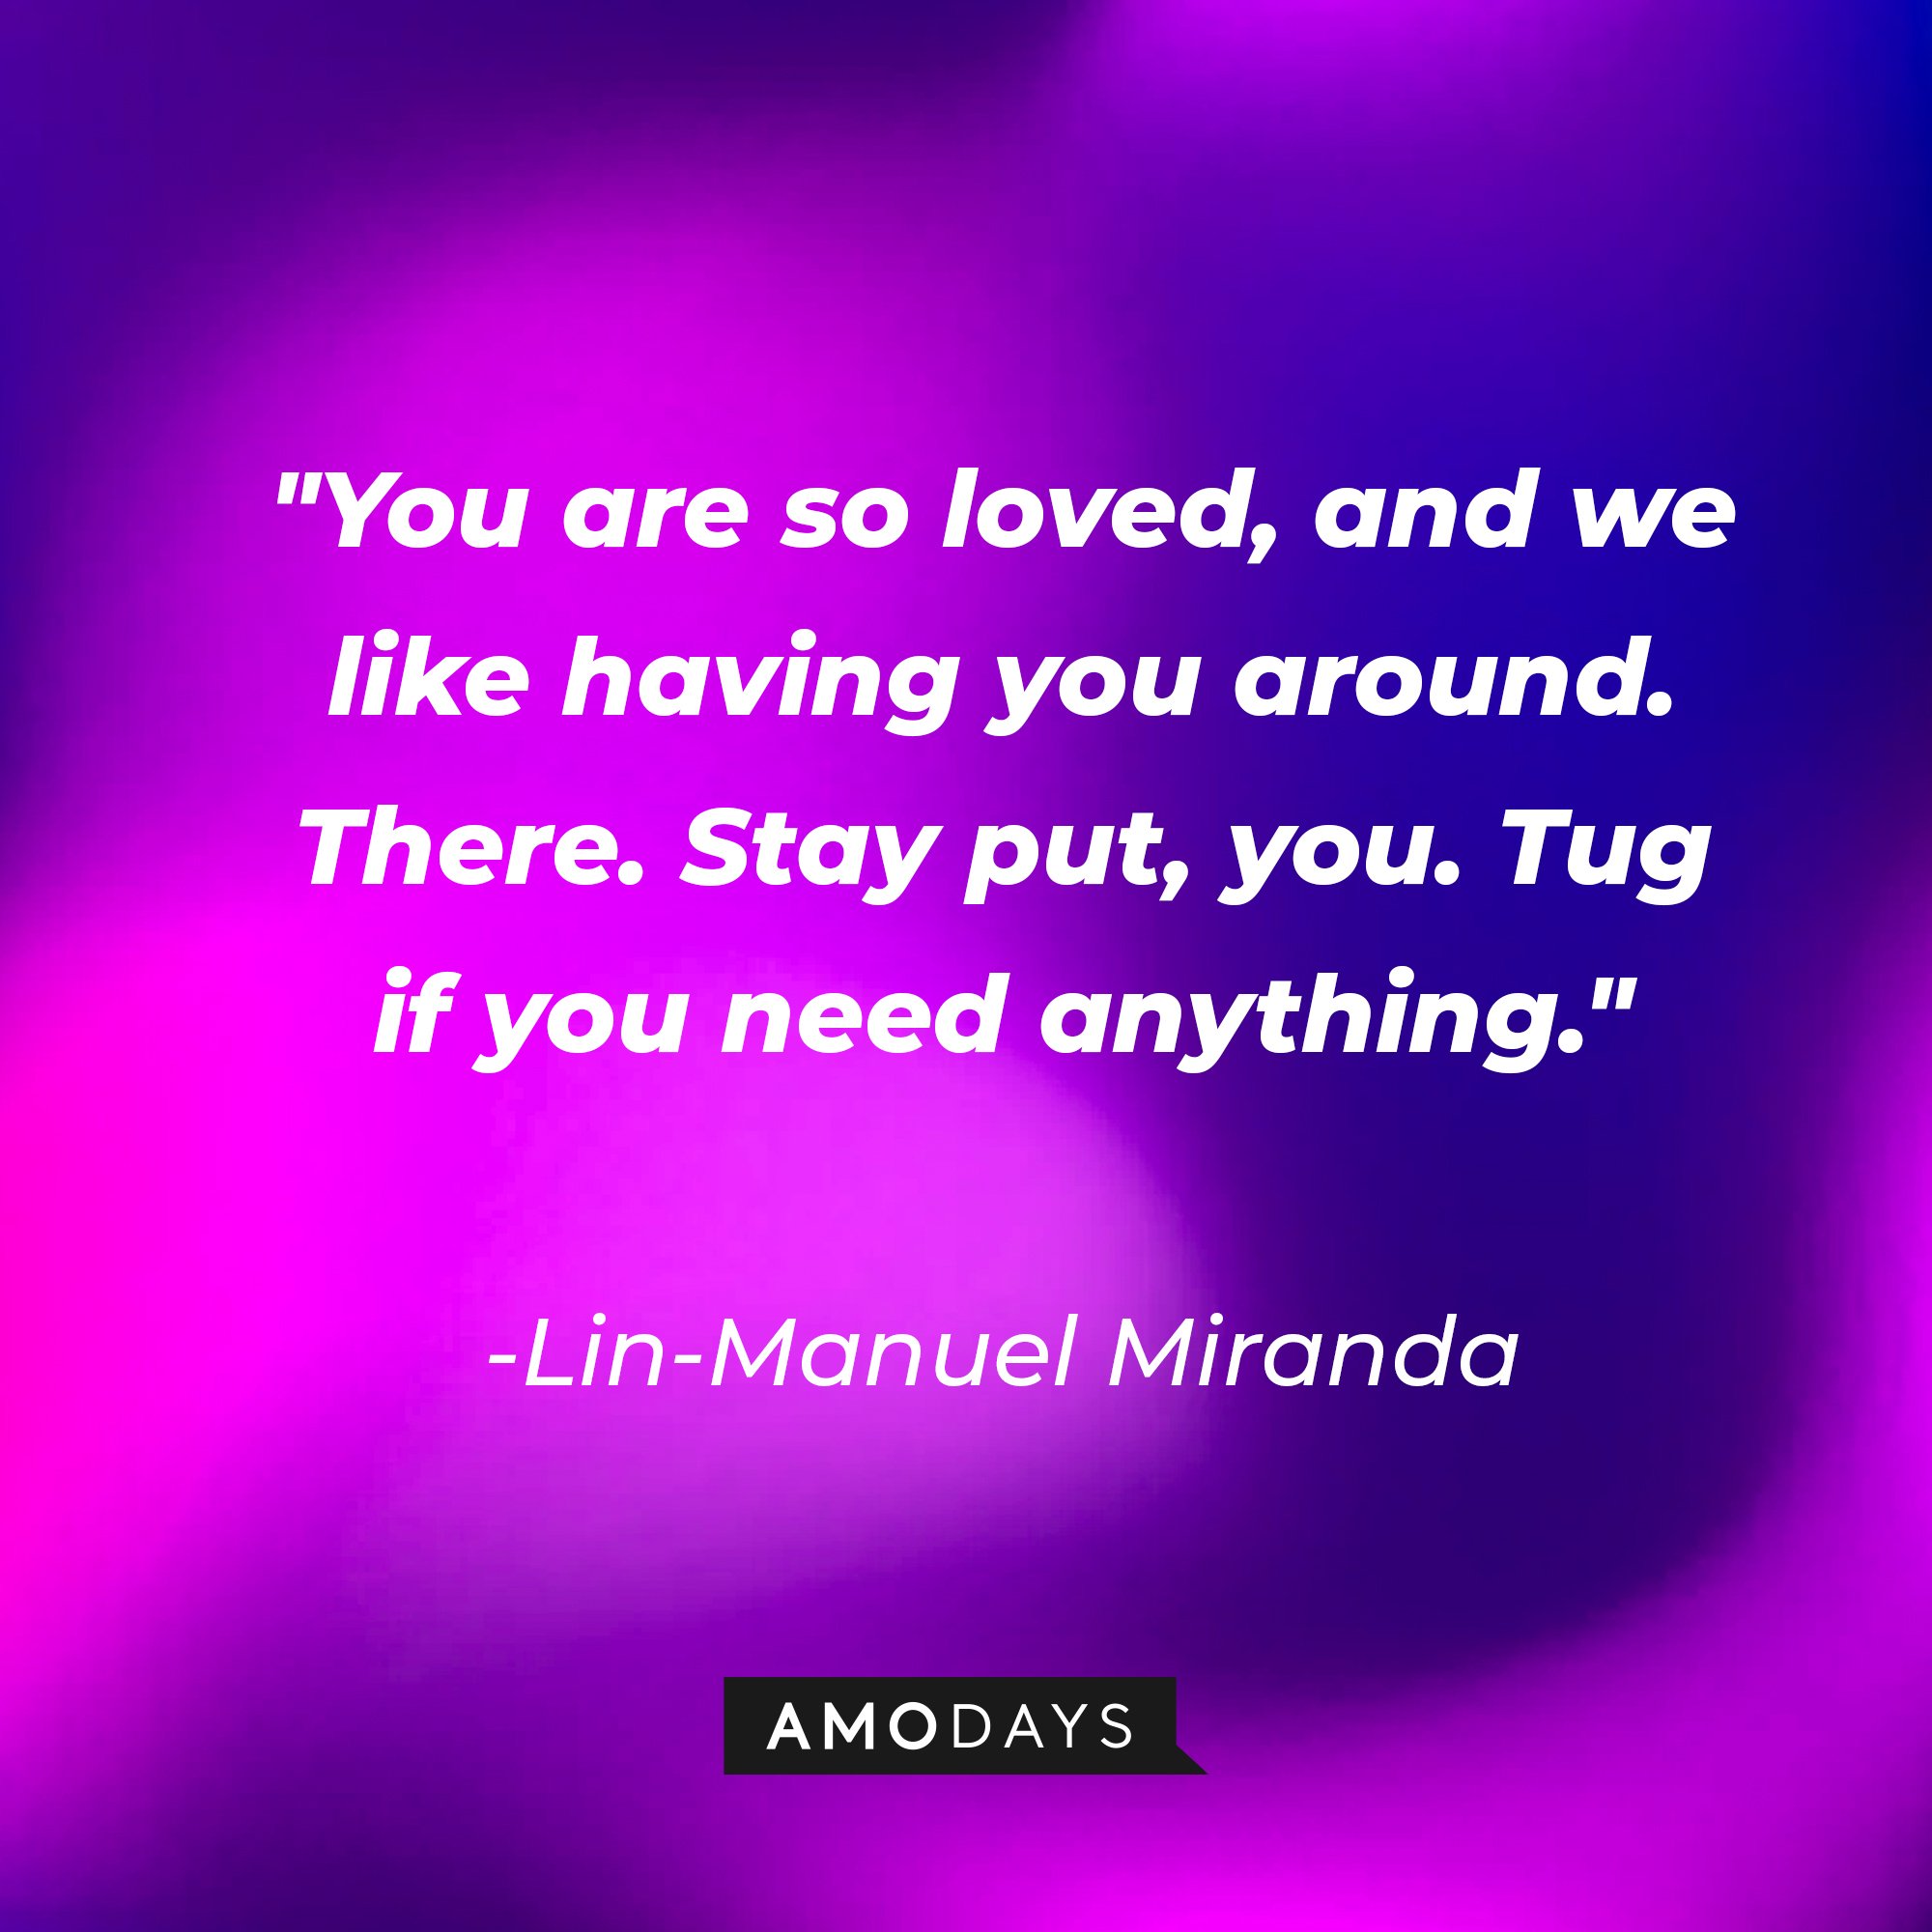 Lin-Manuel Miranda's quote: "You are so loved, and we like having you around. There. Stay put, you. Tug if you need anything." | Image: AmoDays